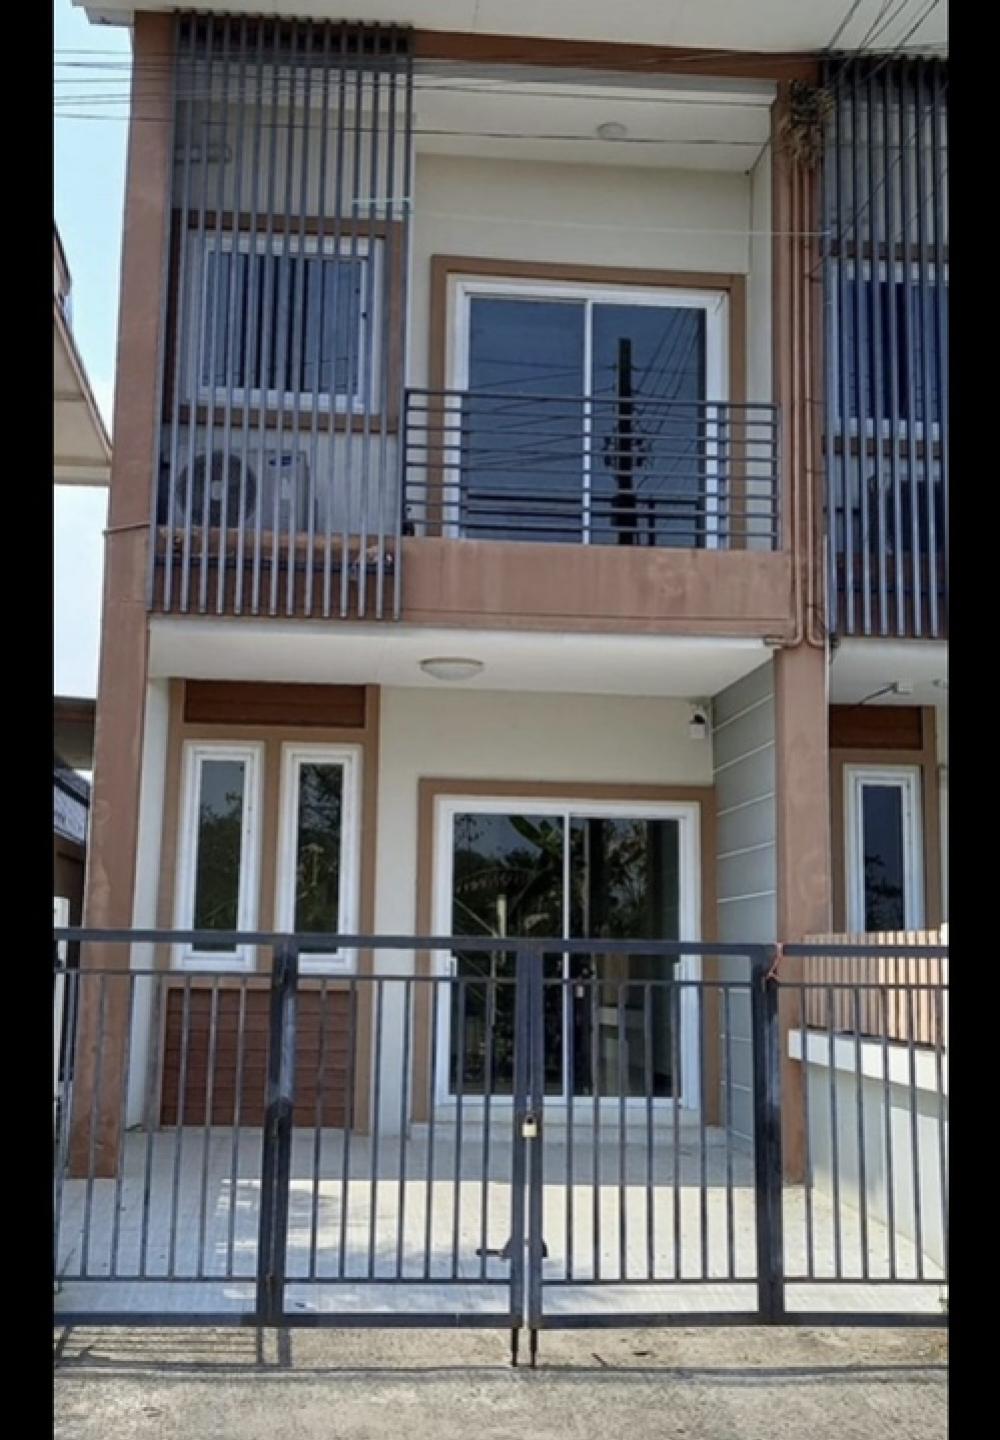 For RentTownhouseKhon Kaen : ❤️❤️2-story townhome for rent, ready to move in, new condition. Good location in Khon Kaen city. Interested line/tel 0859114585 ❤️❤️ Khum Chomphon Village Behind Chomphon Market Near the governors residence Near Bueng Thung Sang Near Ban Don Market Suitab